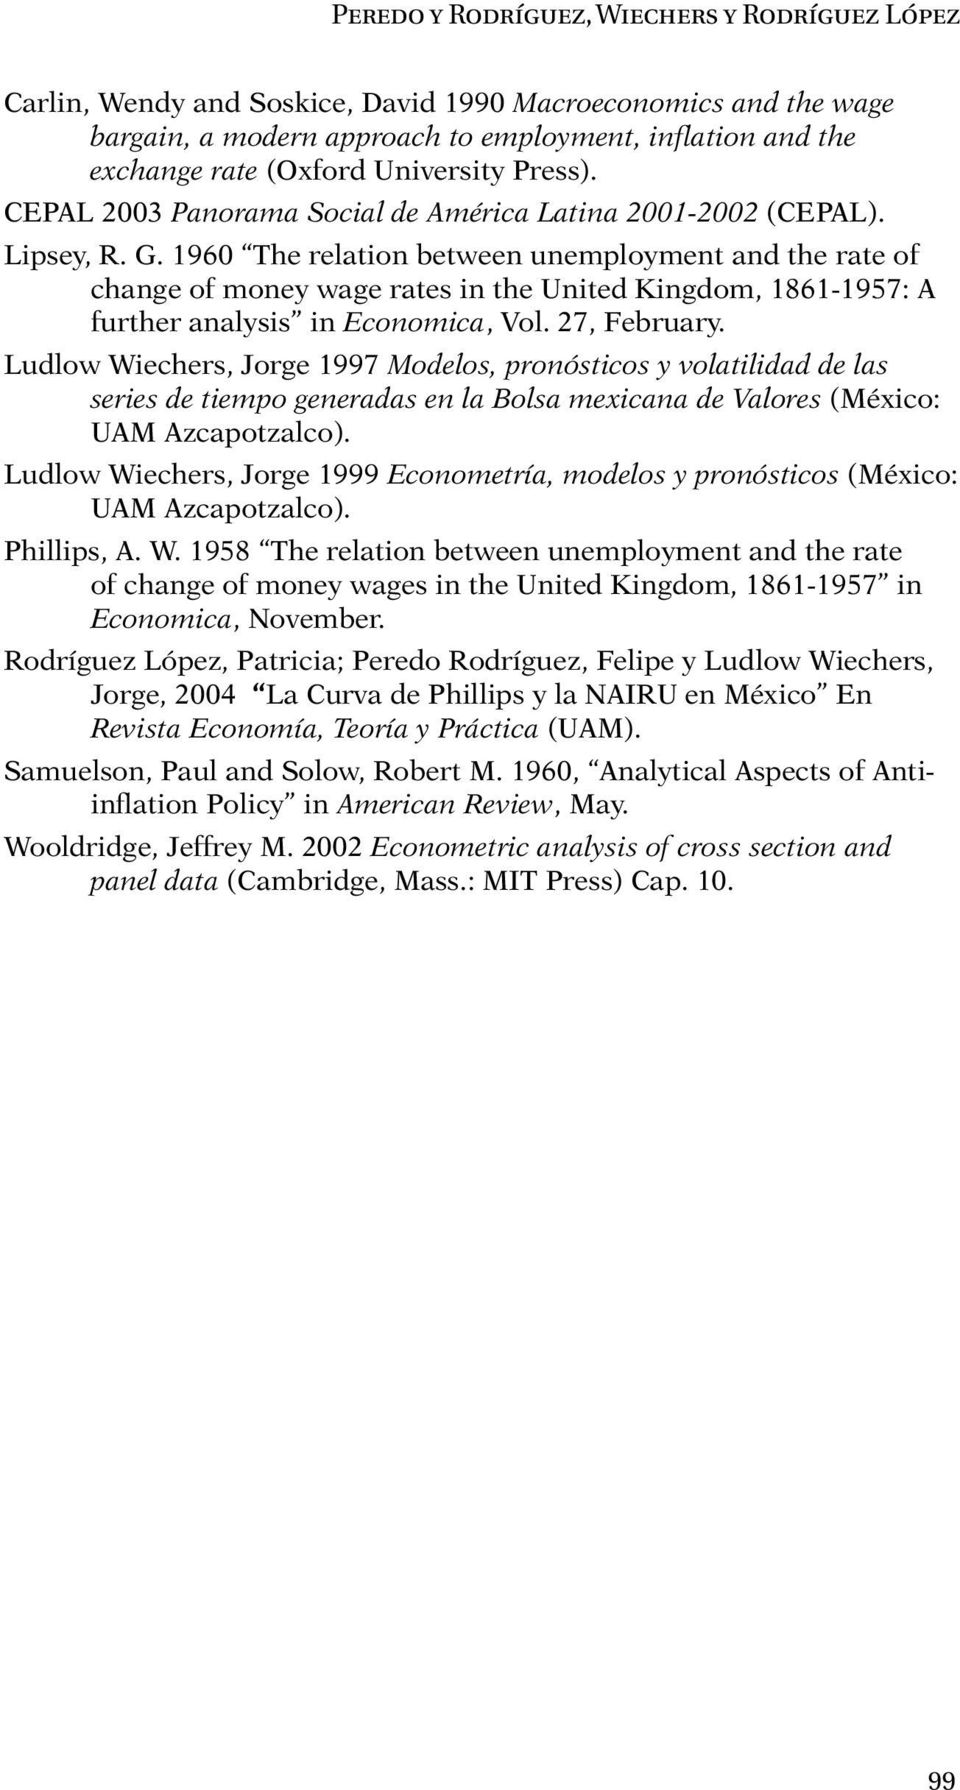 1960 The relation between unemployment and the rate of change of money wage rates in the United Kingdom, 1861-1957: A further analysis in Economica, Vol. 27, February.